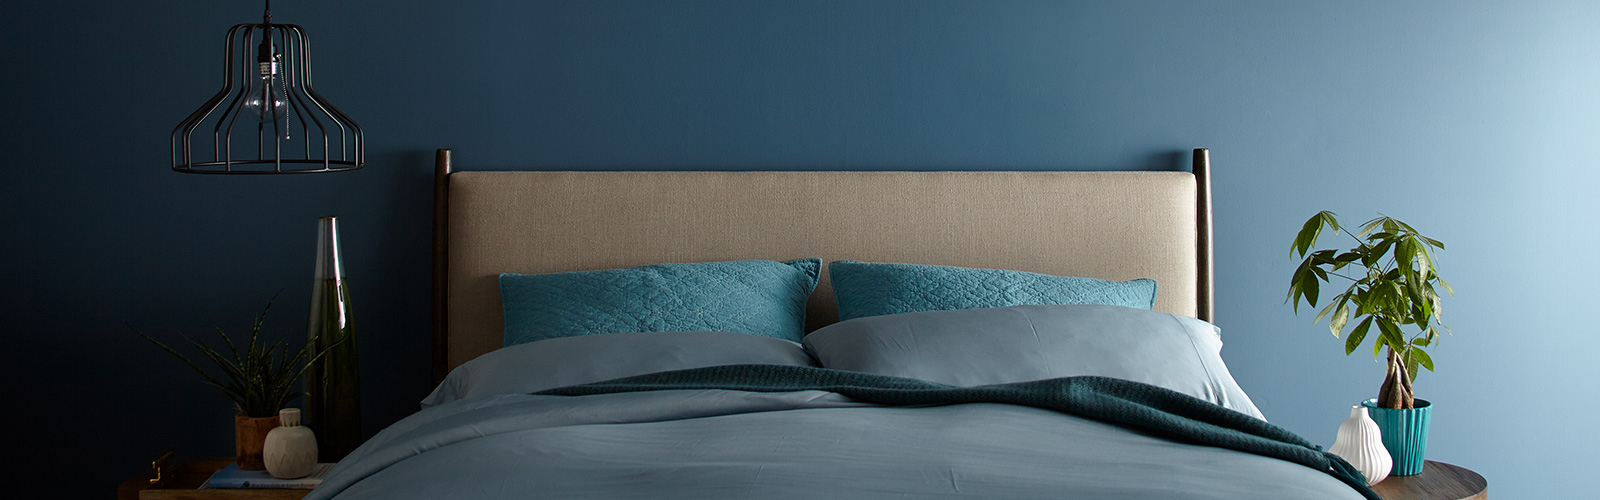 image of a bed with a blue wall